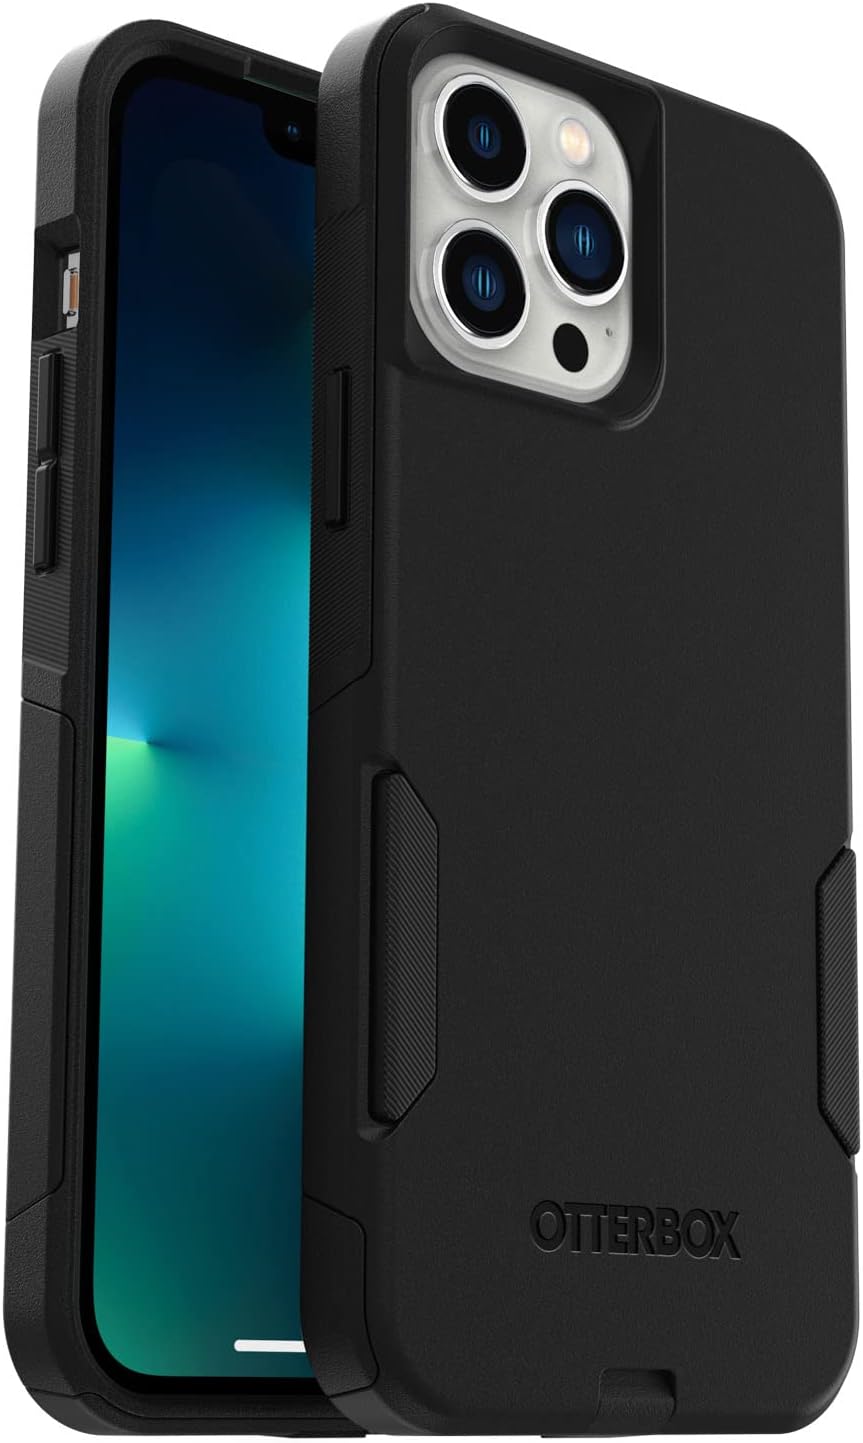 OtterBox COMMUTER SERIES for iPhone 13 Pro Max/12 Pro Max - Black (Certified Refubrbished)